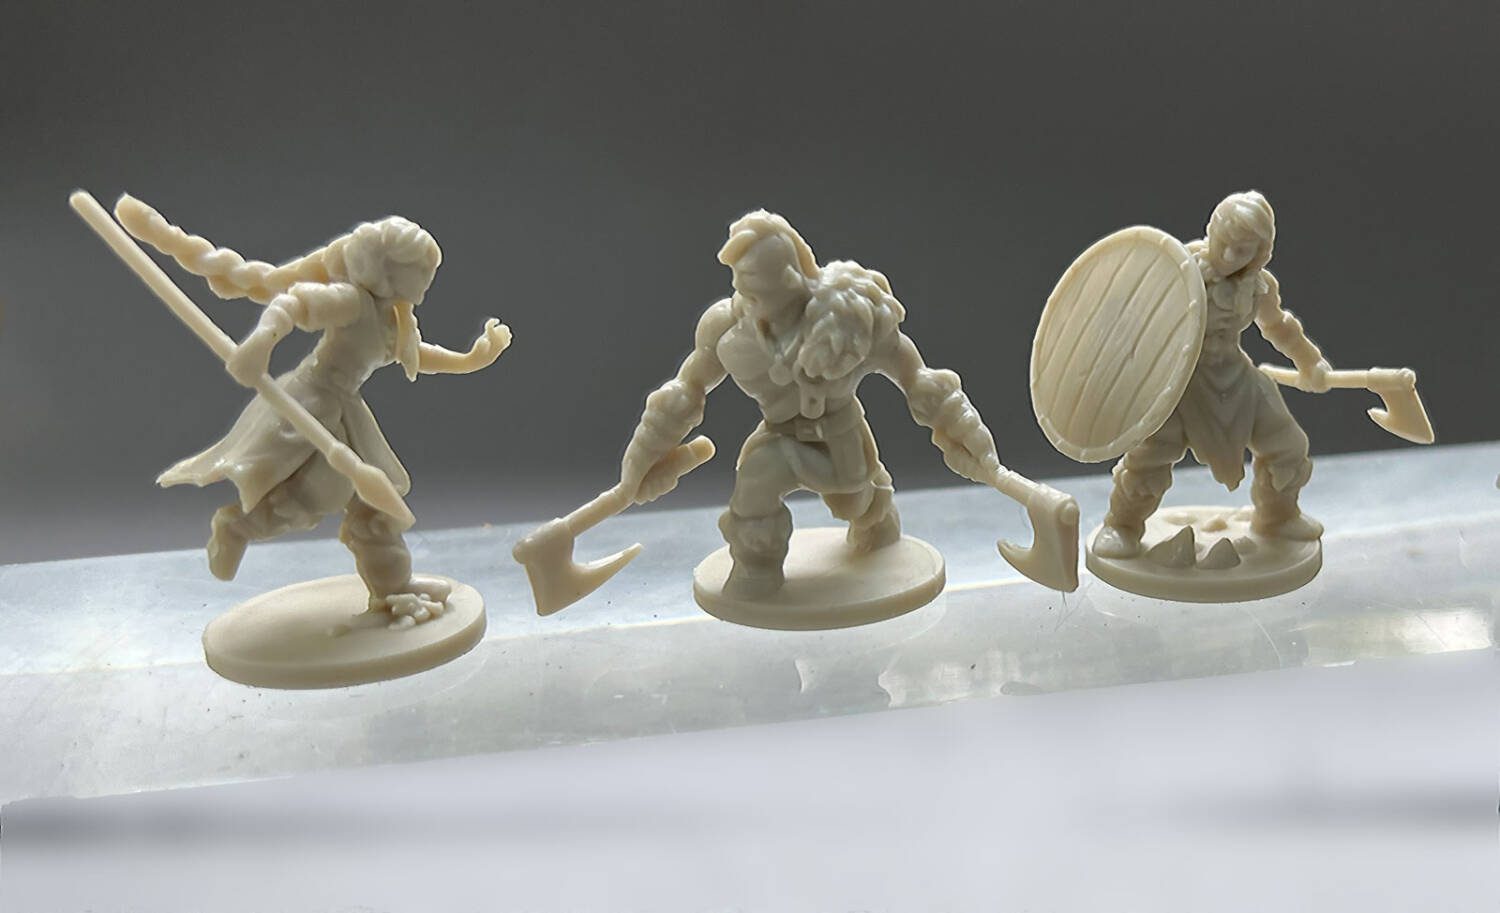 Three of the Warchief miniatures.